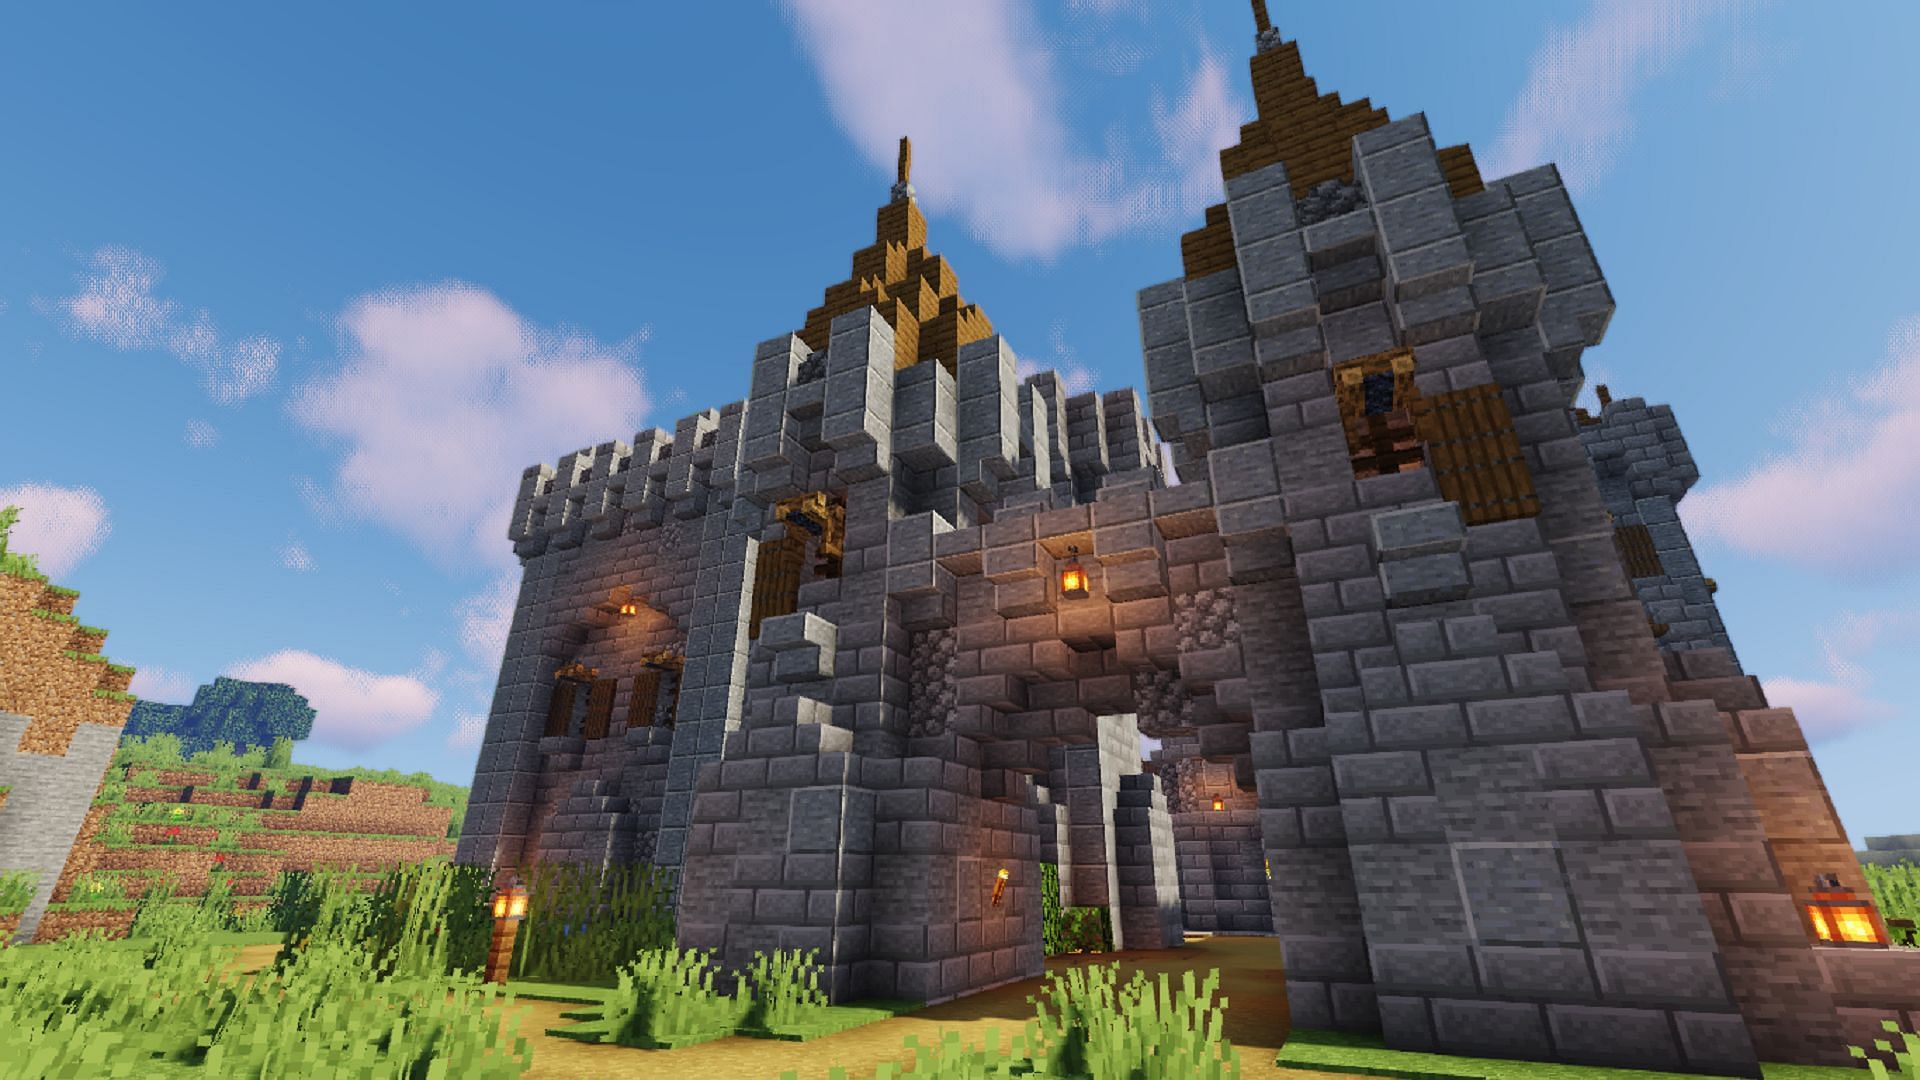 Building castles in Minecraft takes plenty of work and a few tricks (Image via Togethercraft)